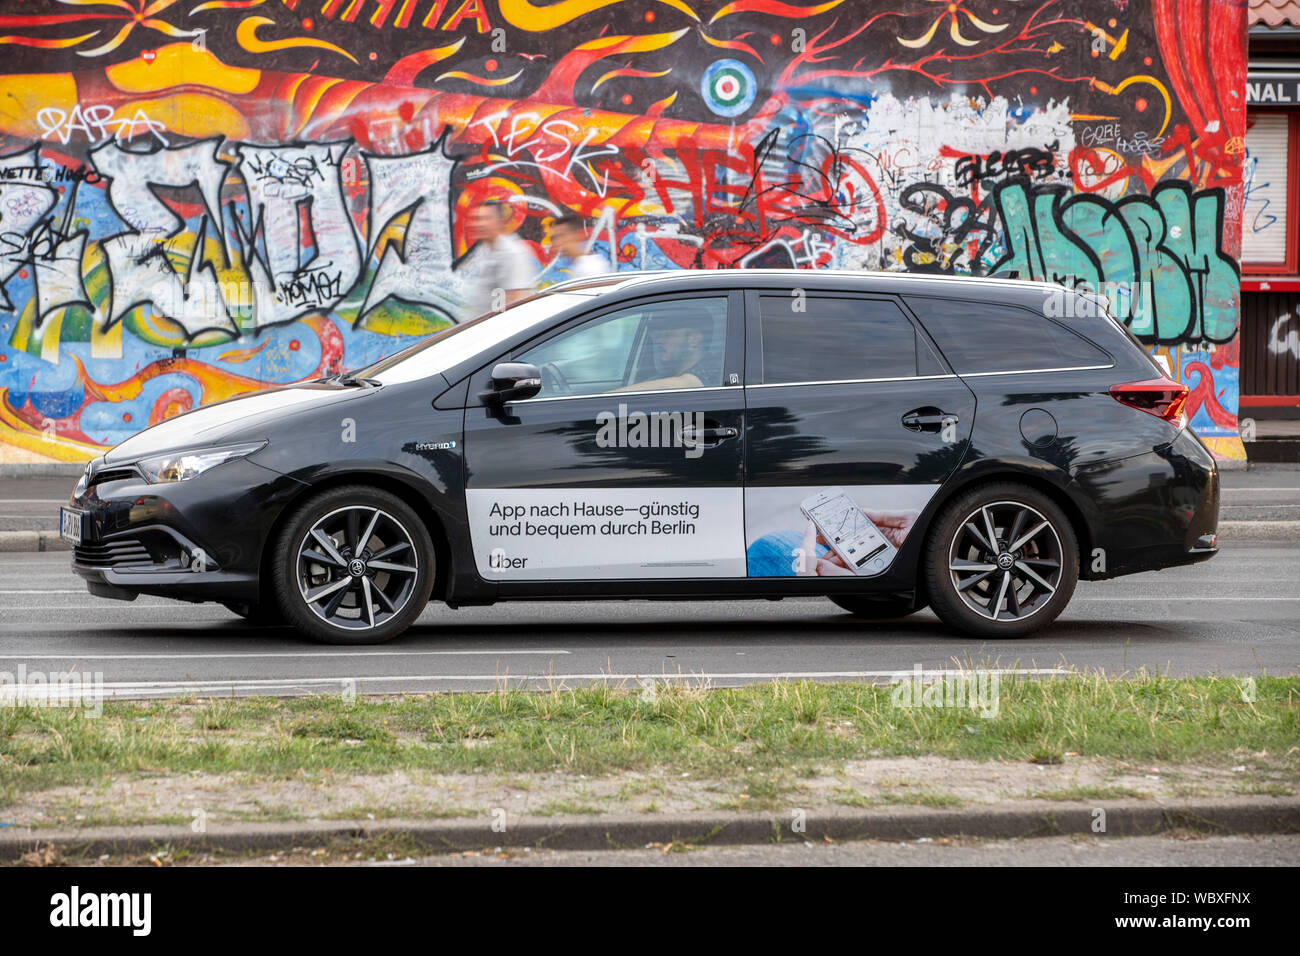 Vehicle of the Uber driving service, Taxi service, chauffeur service, Berlin, Stock Photo